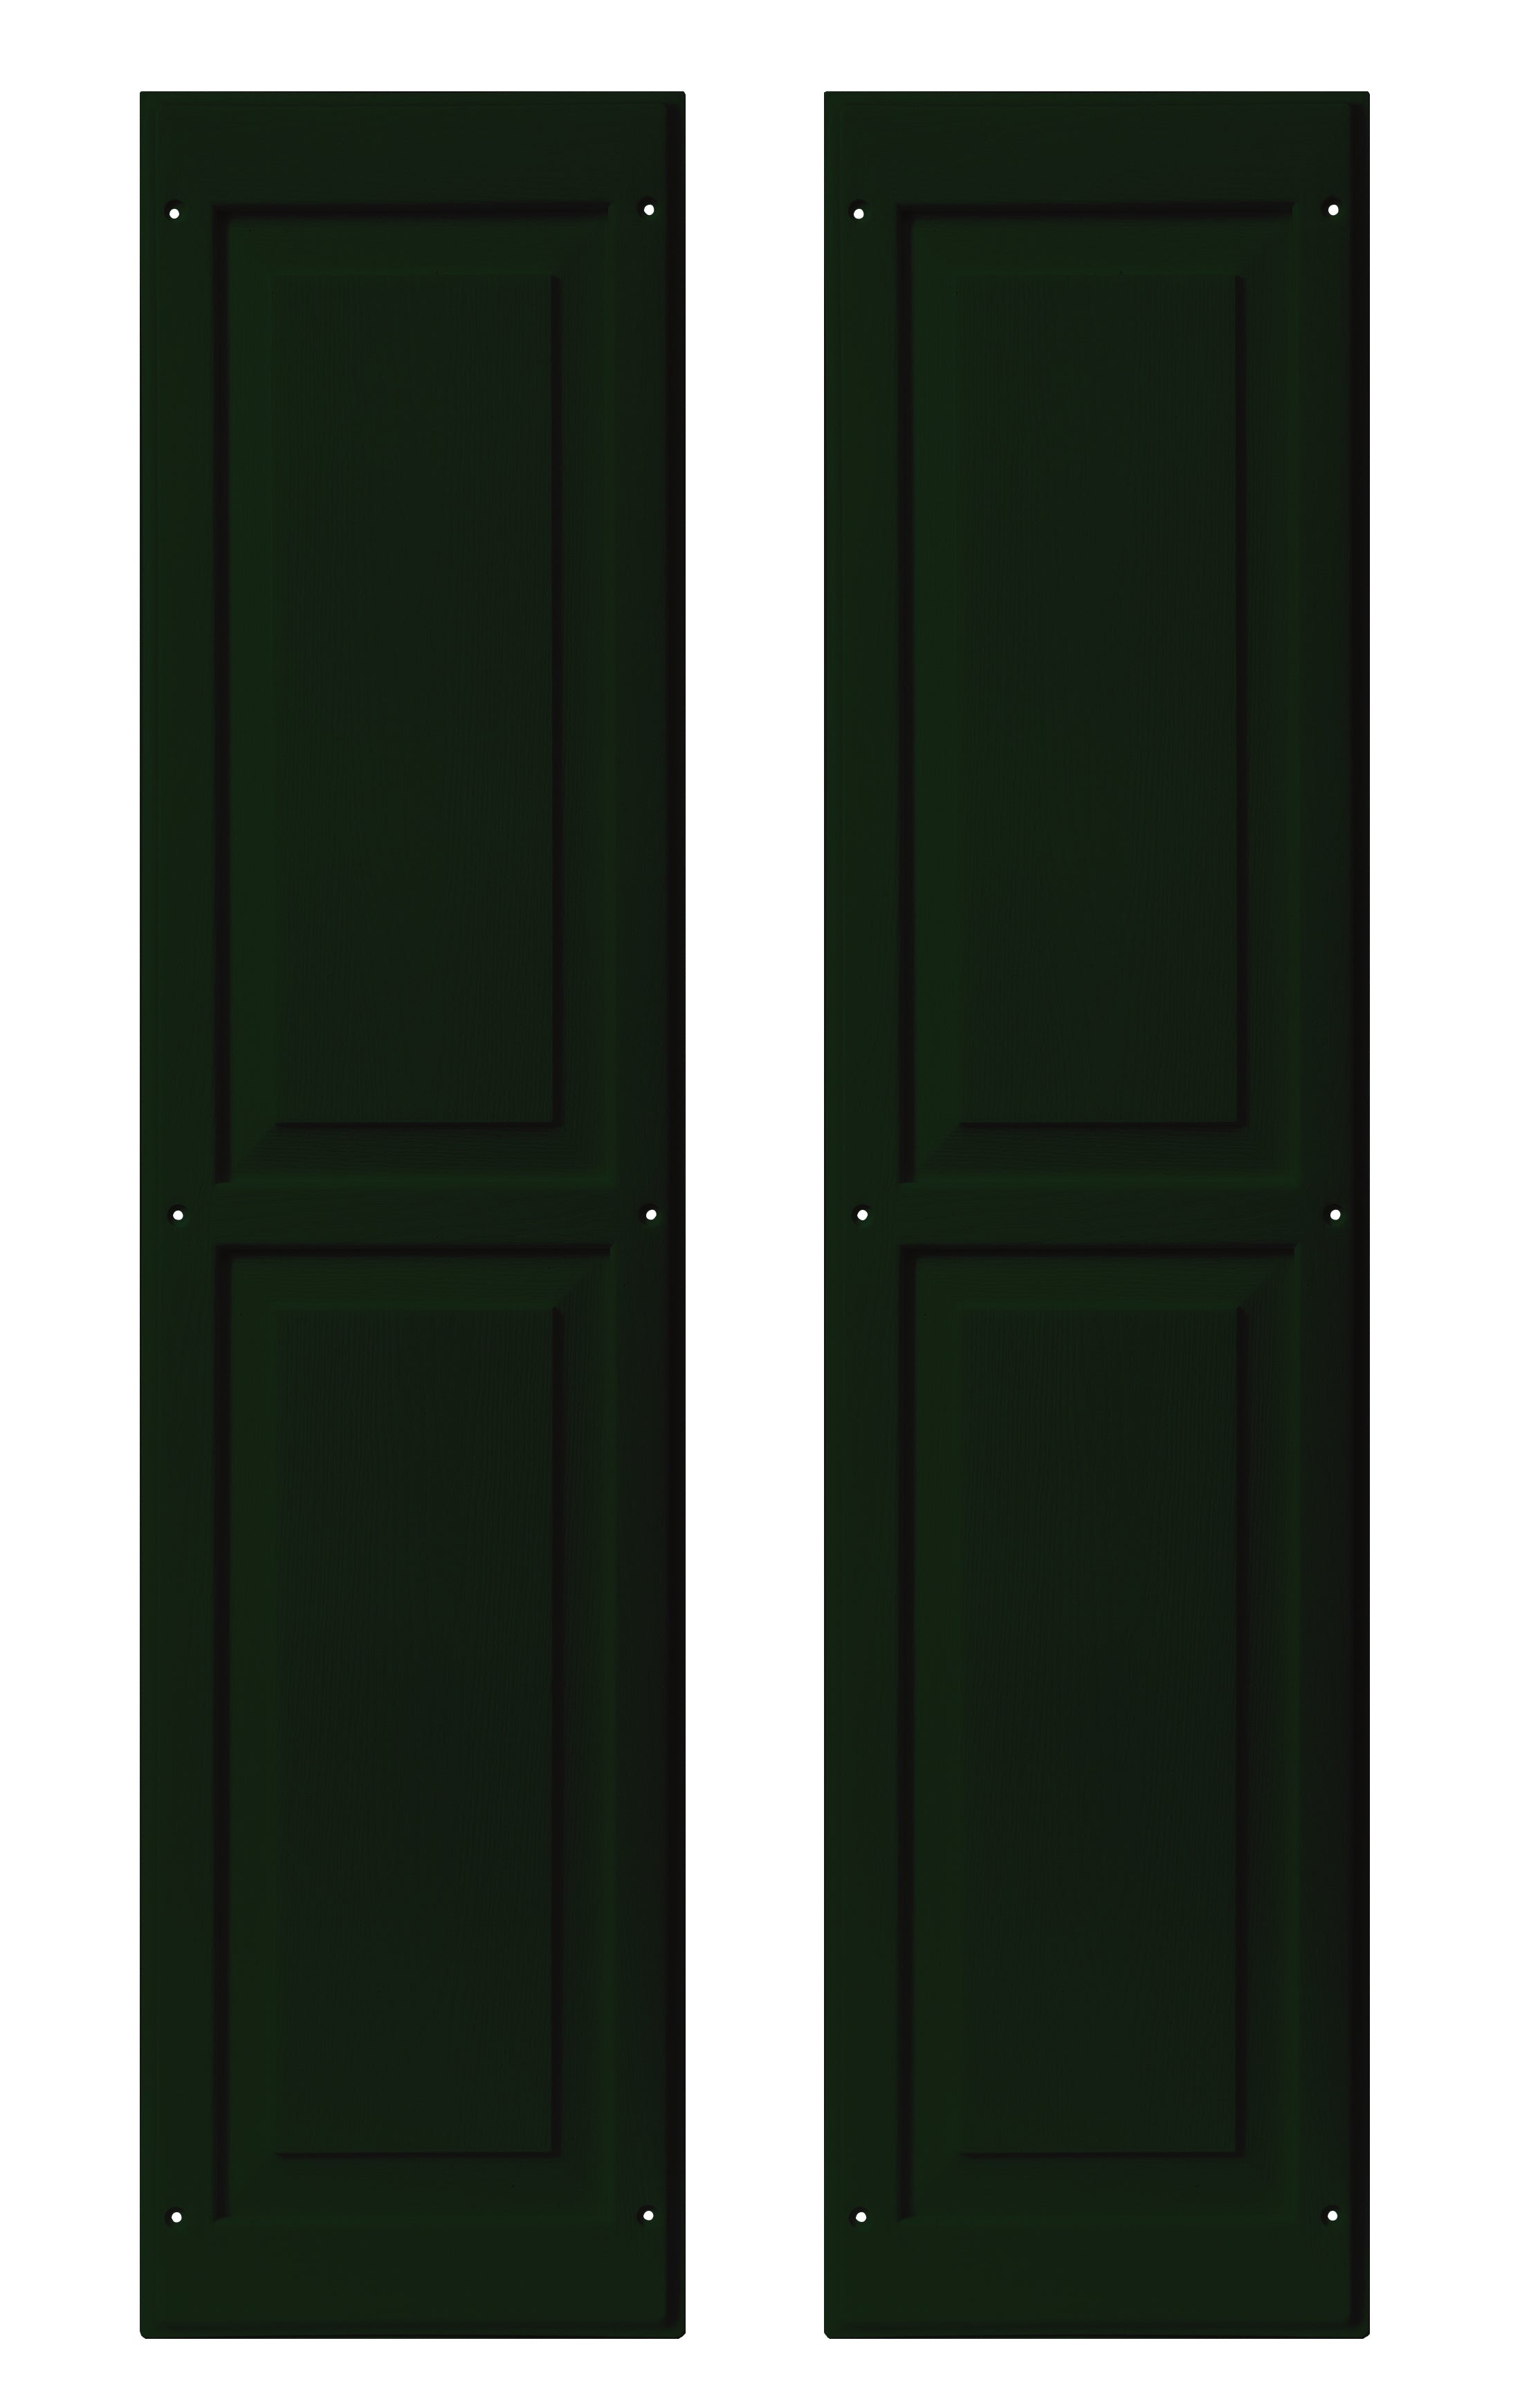 Pair of 9" W x 36" H Raised Panel Forest Green Shutters for Sheds, Playhouses, and MORE